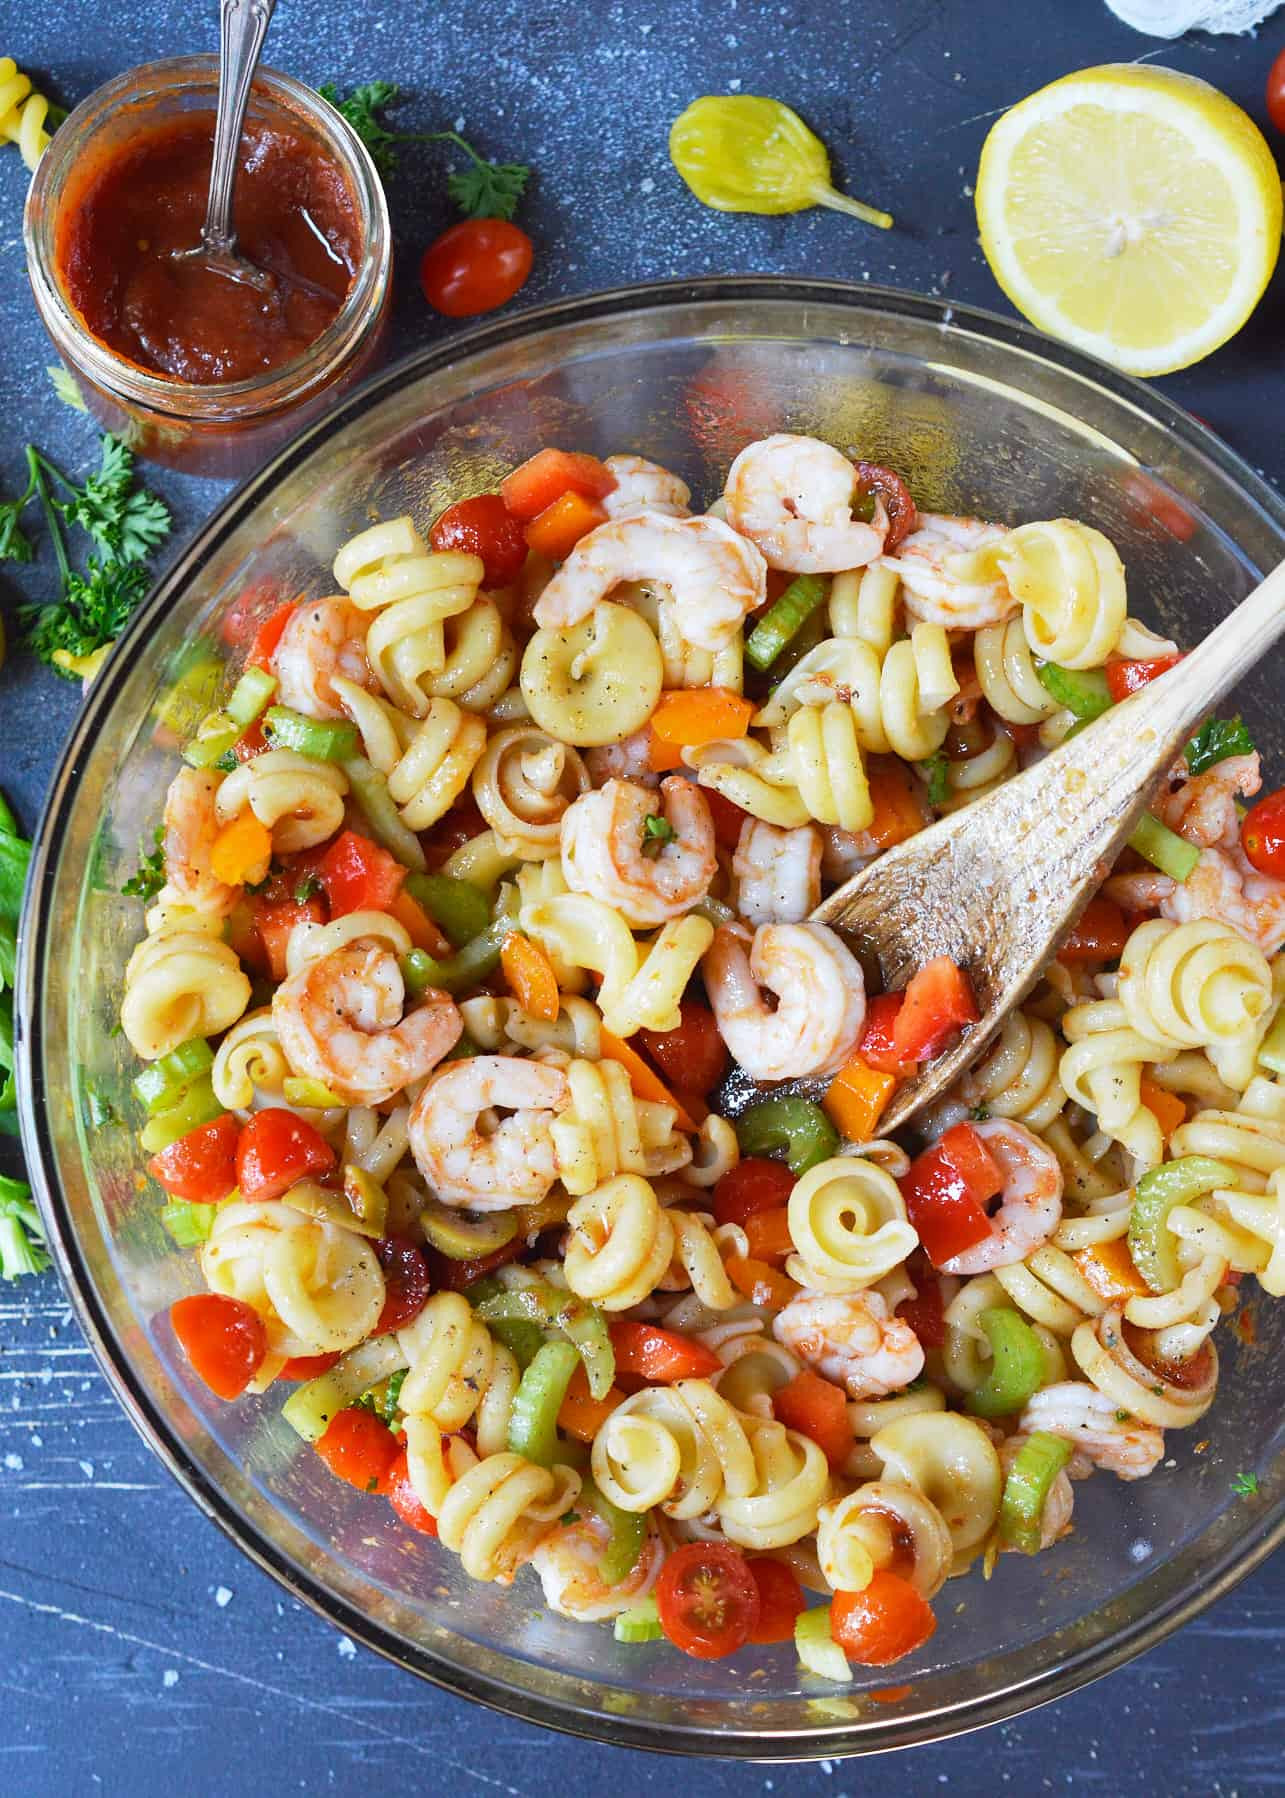 Recipe For Seafood Pasta Salad
 A Scrumptious Healthy Treat to Enjoy Seafood Pasta Recipes